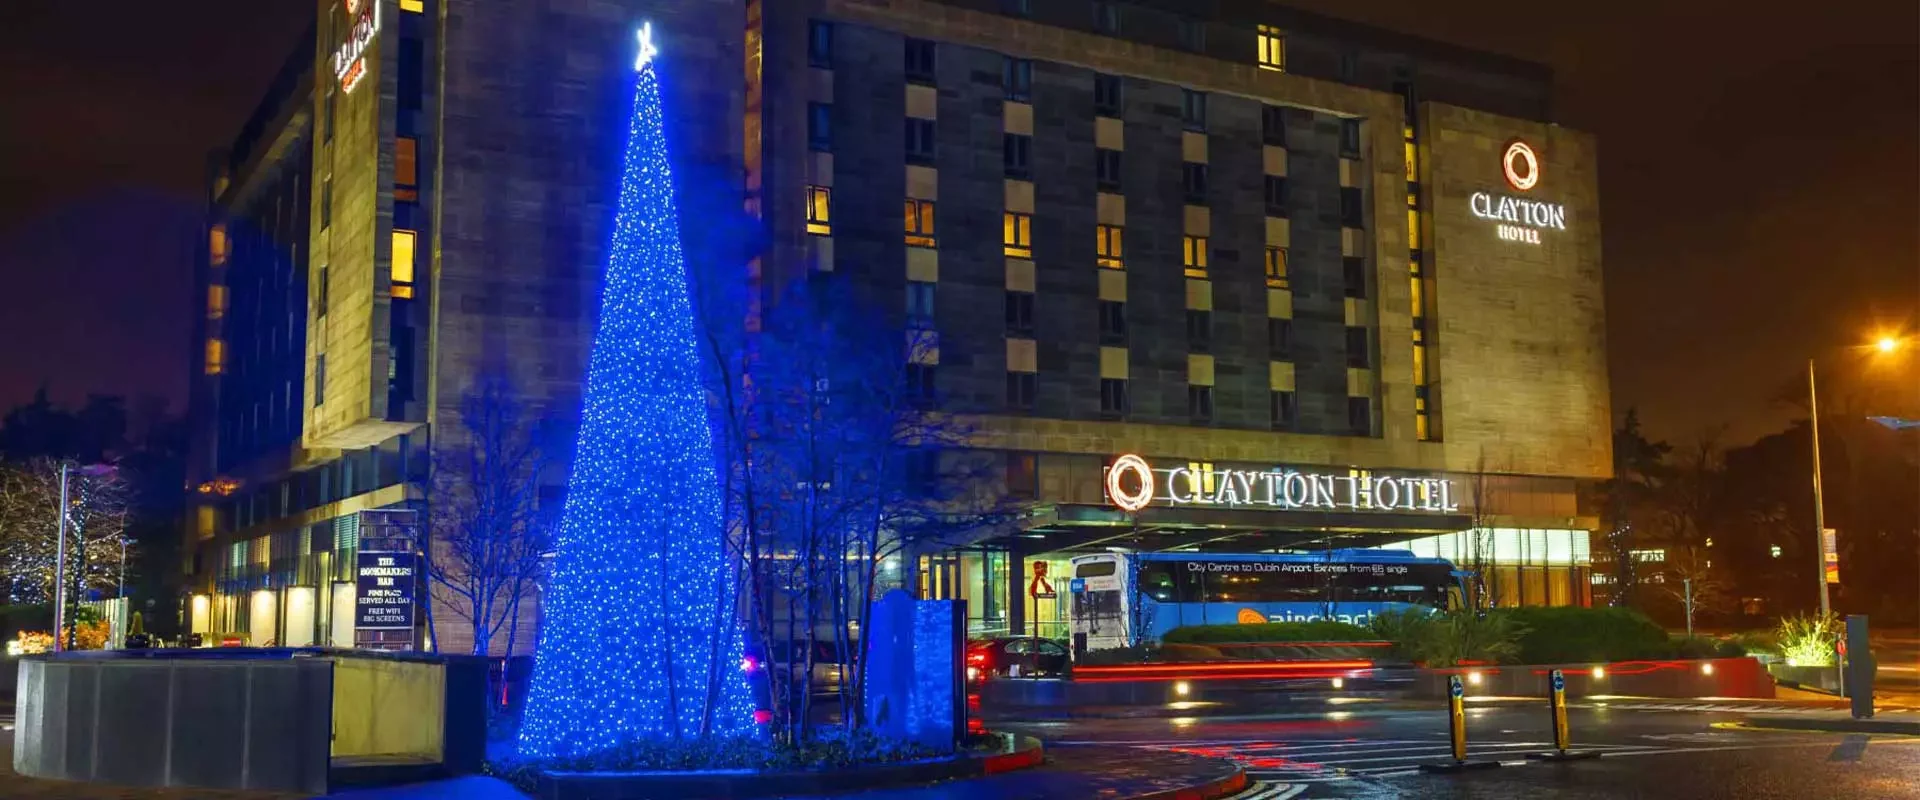 Giant Christmas tree supplied by Fantasy Lights at the Clayton Hotel in Leopardstown Dublin Ireland